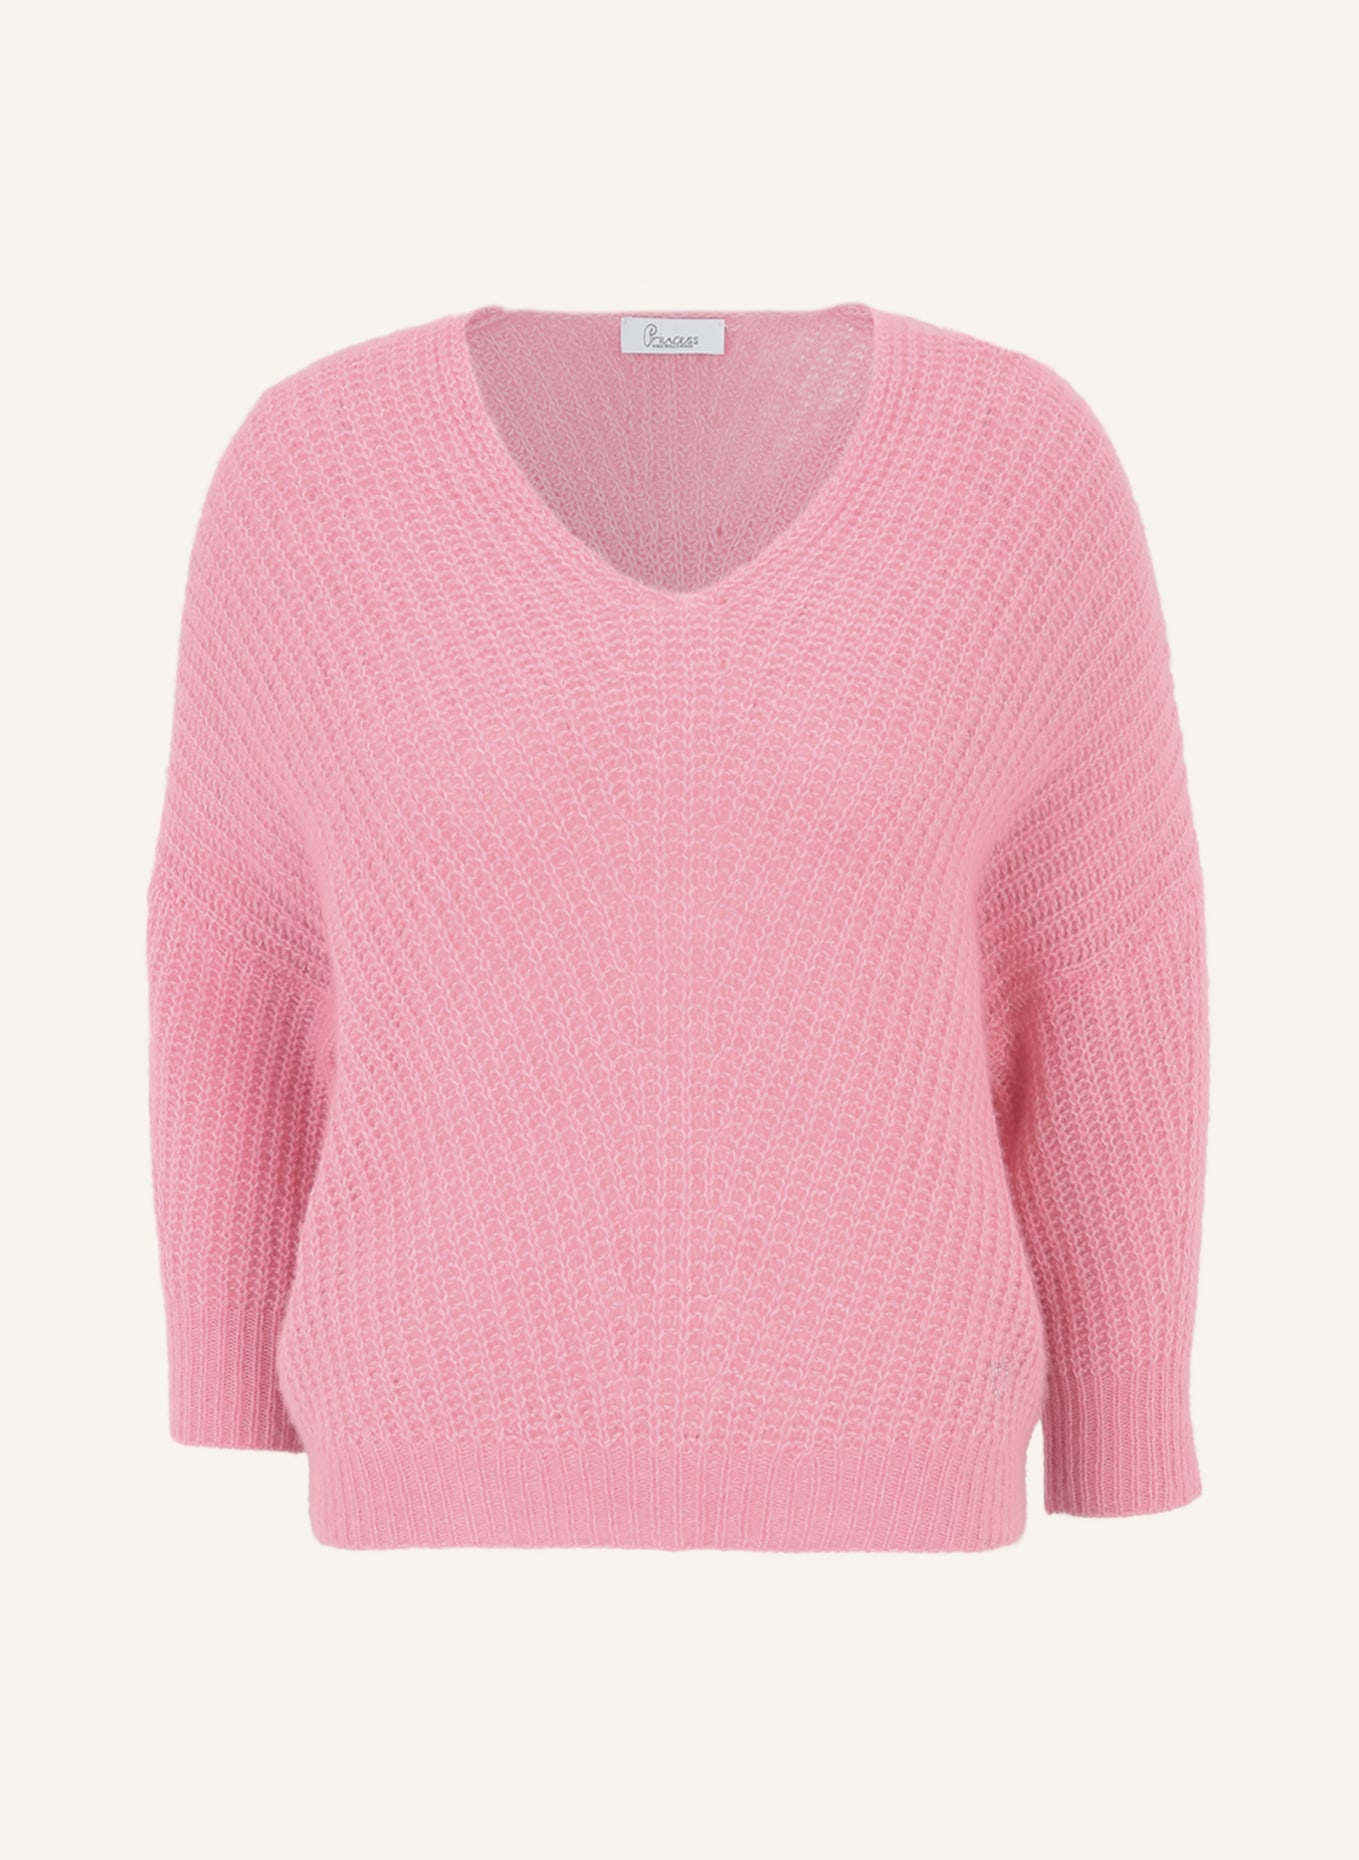 Princess GOES HOLLYWOOD Pullover mit Cashmere, Farbe: PINK (Bild 1)